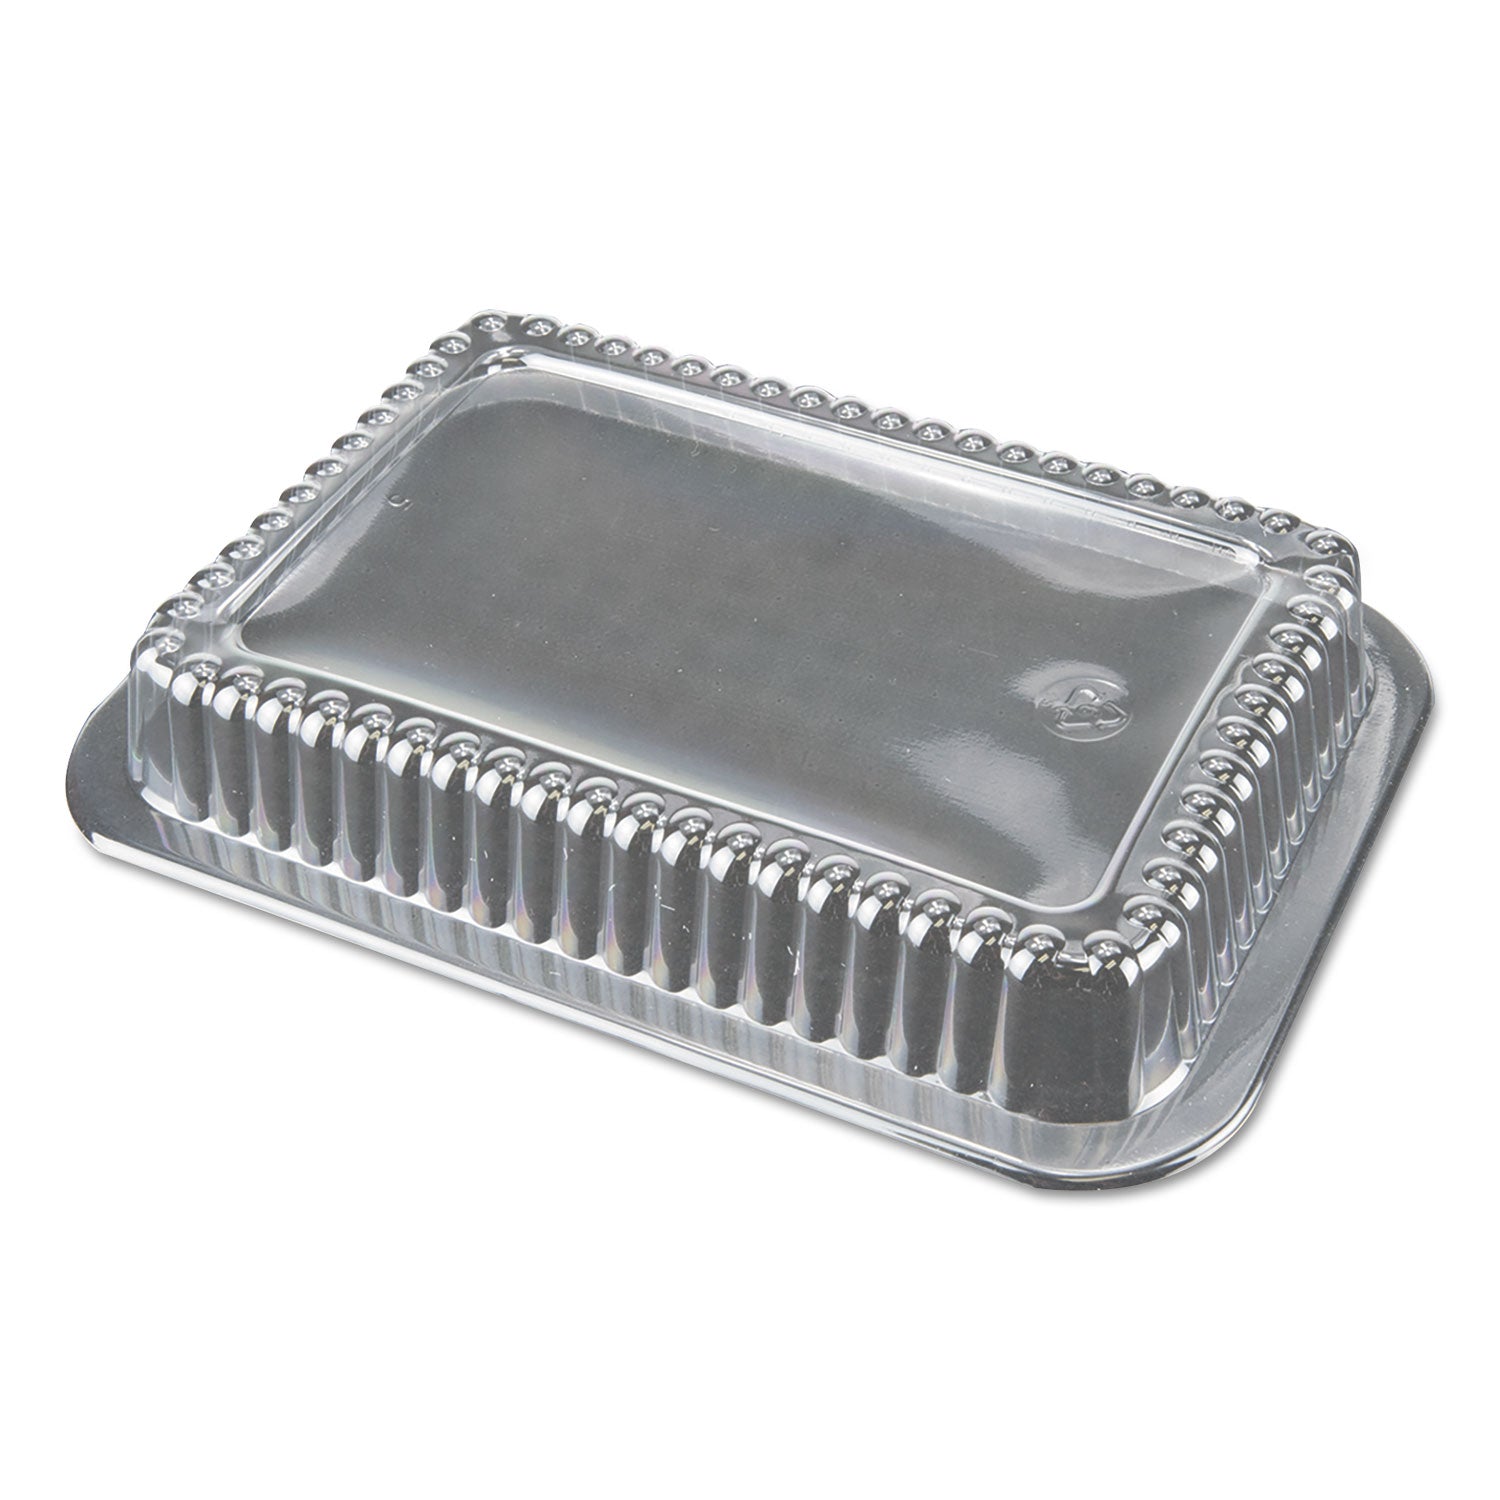 dome-lids-for-15-lb-oblong-containers-656-x-463-x-2-clear-plastic-500-carton_dpkp245500 - 1